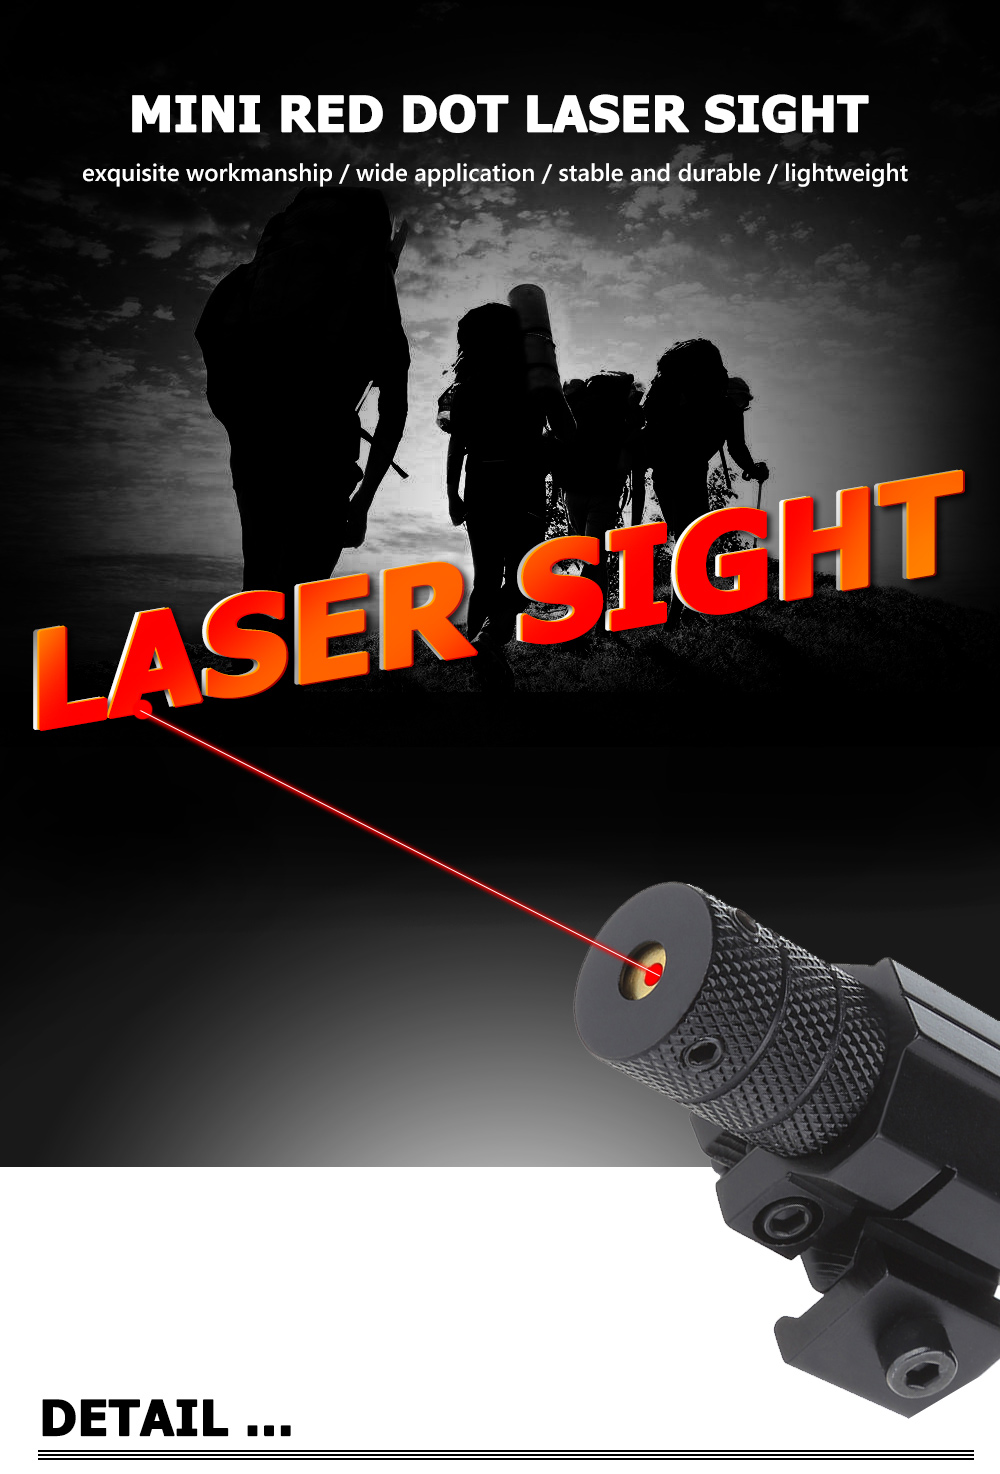 Mini Red Dot Laser Sight for Rifle Handgun Scope with Wrench